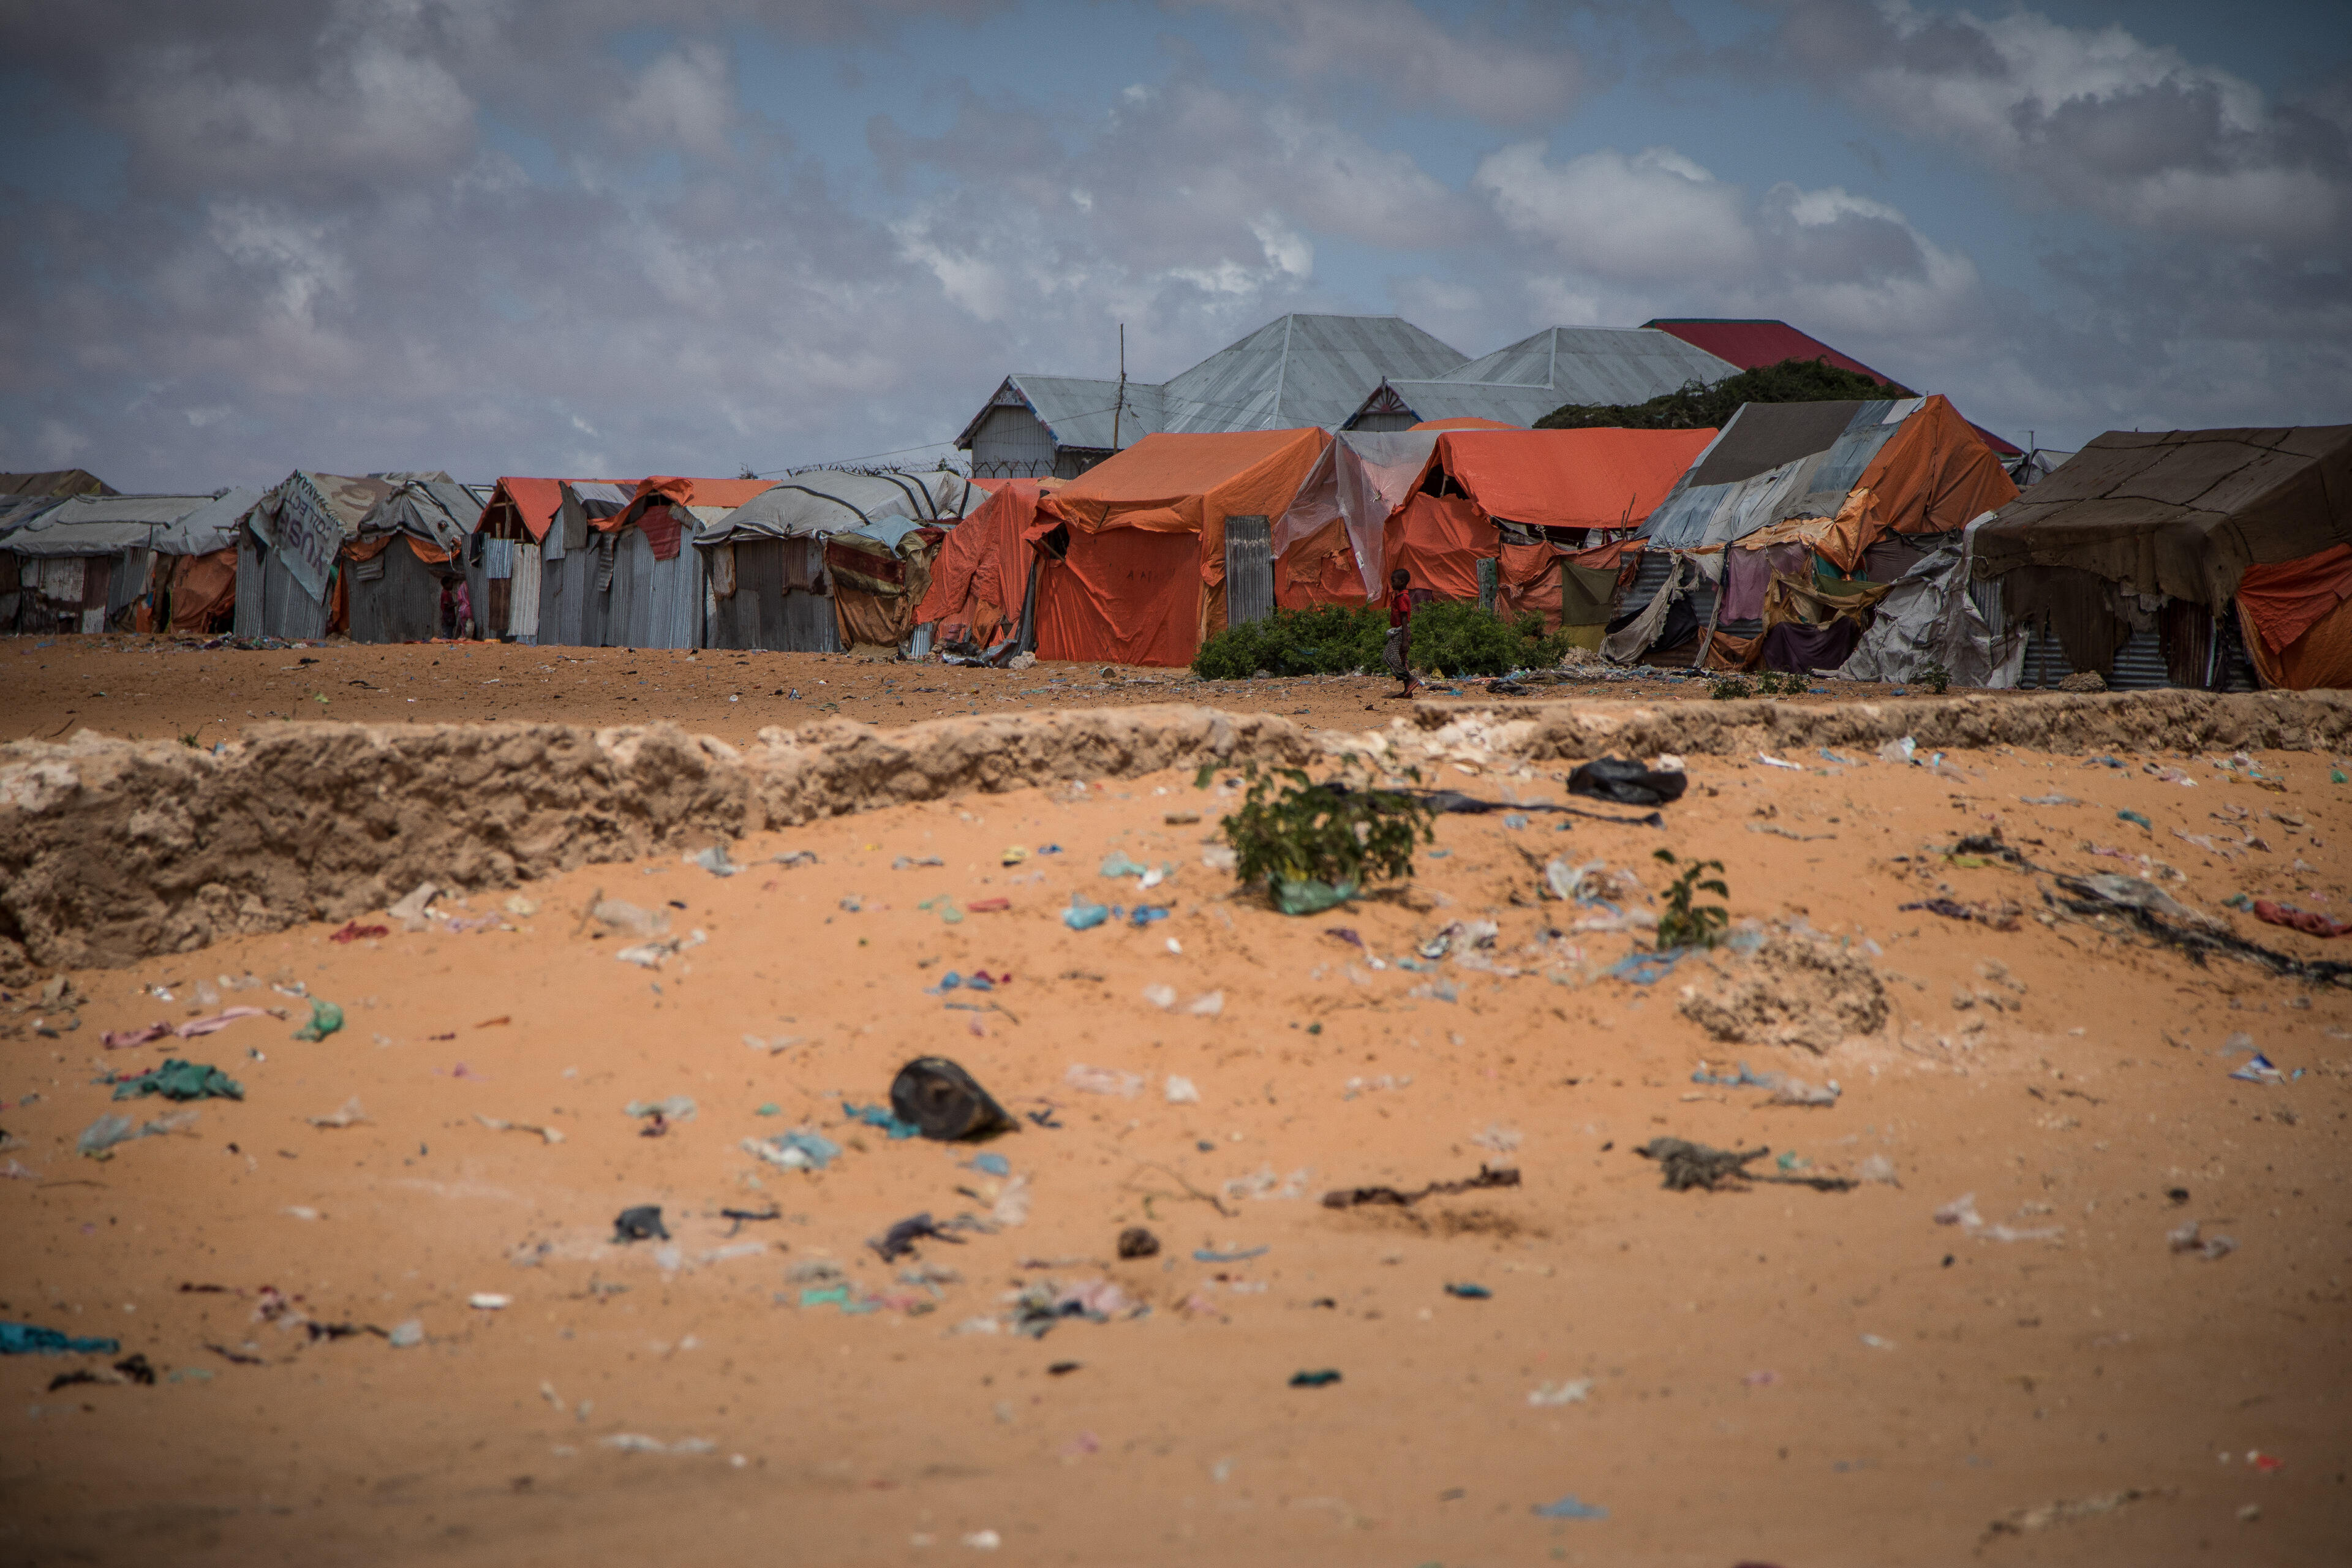 A small boy stands against the backdrop of tents for displaced families in an arid, littered landscape outside Mogadishu, Somalia.